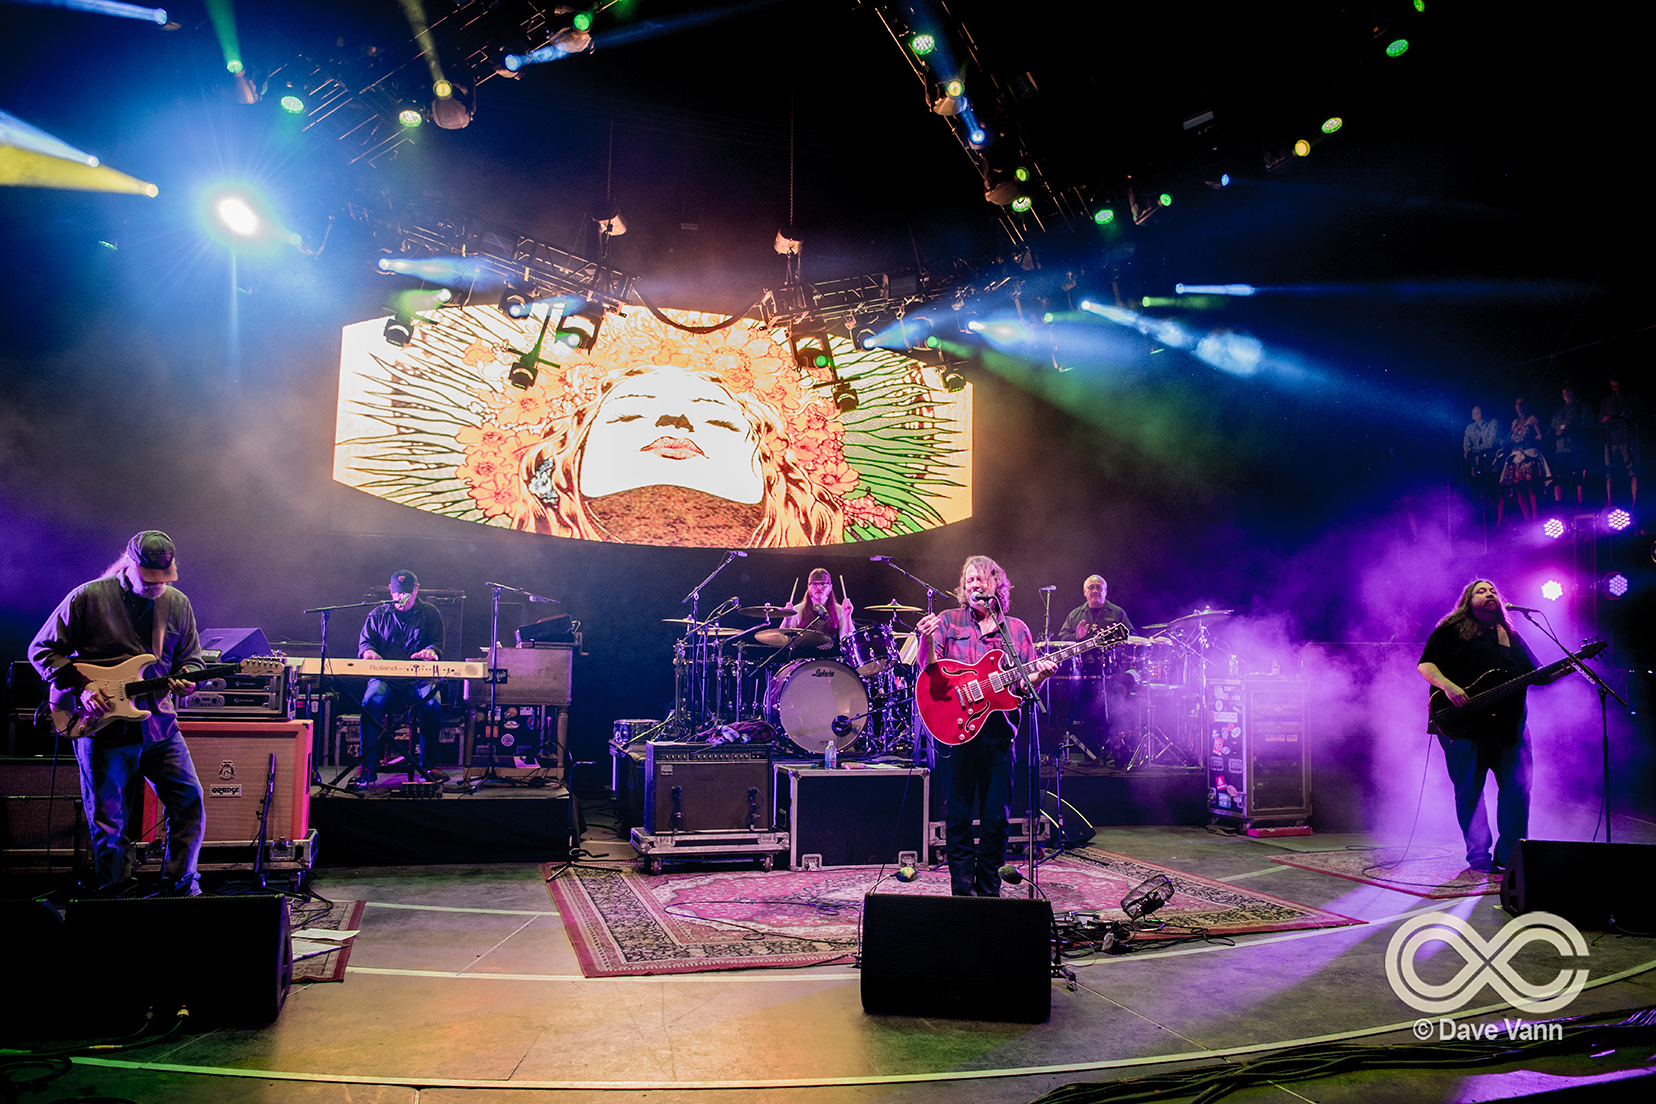 7 of the Greatest Widespread Panic Stories as Told by the Band